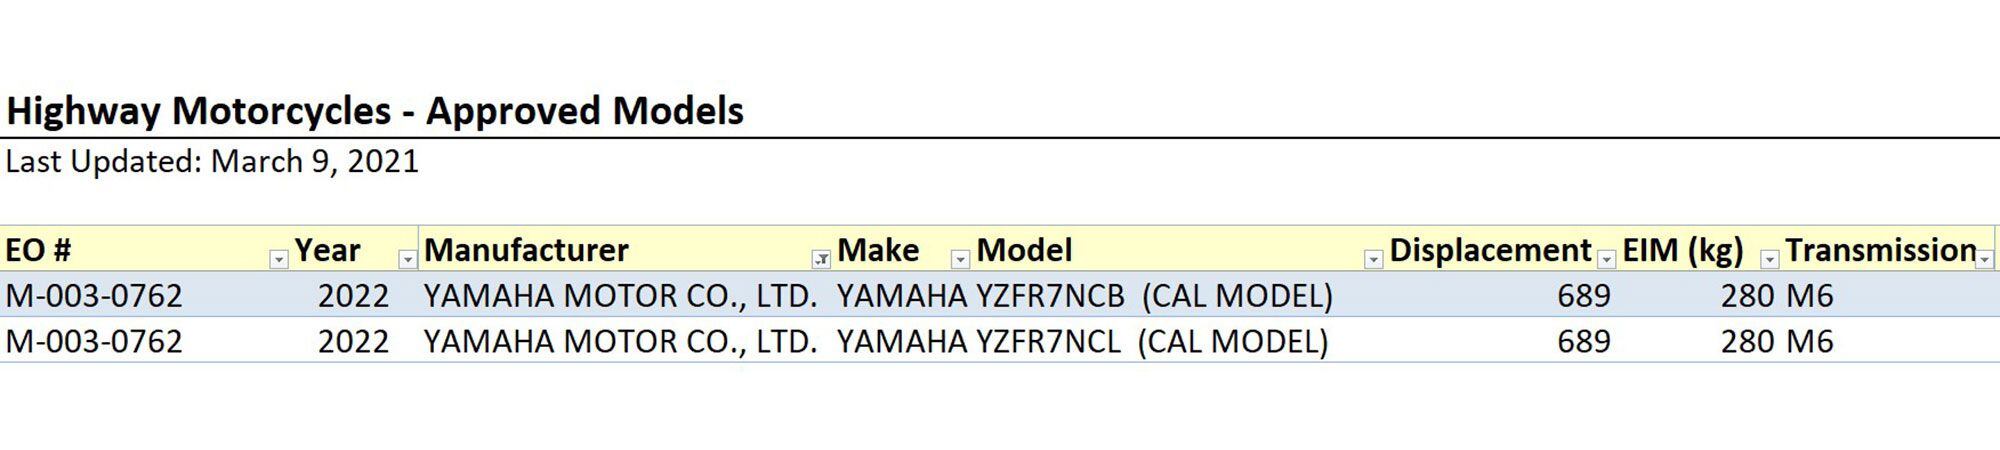 These CARB filings show Yamaha putting two YZF models down for certification, though the differences are likely just color options.